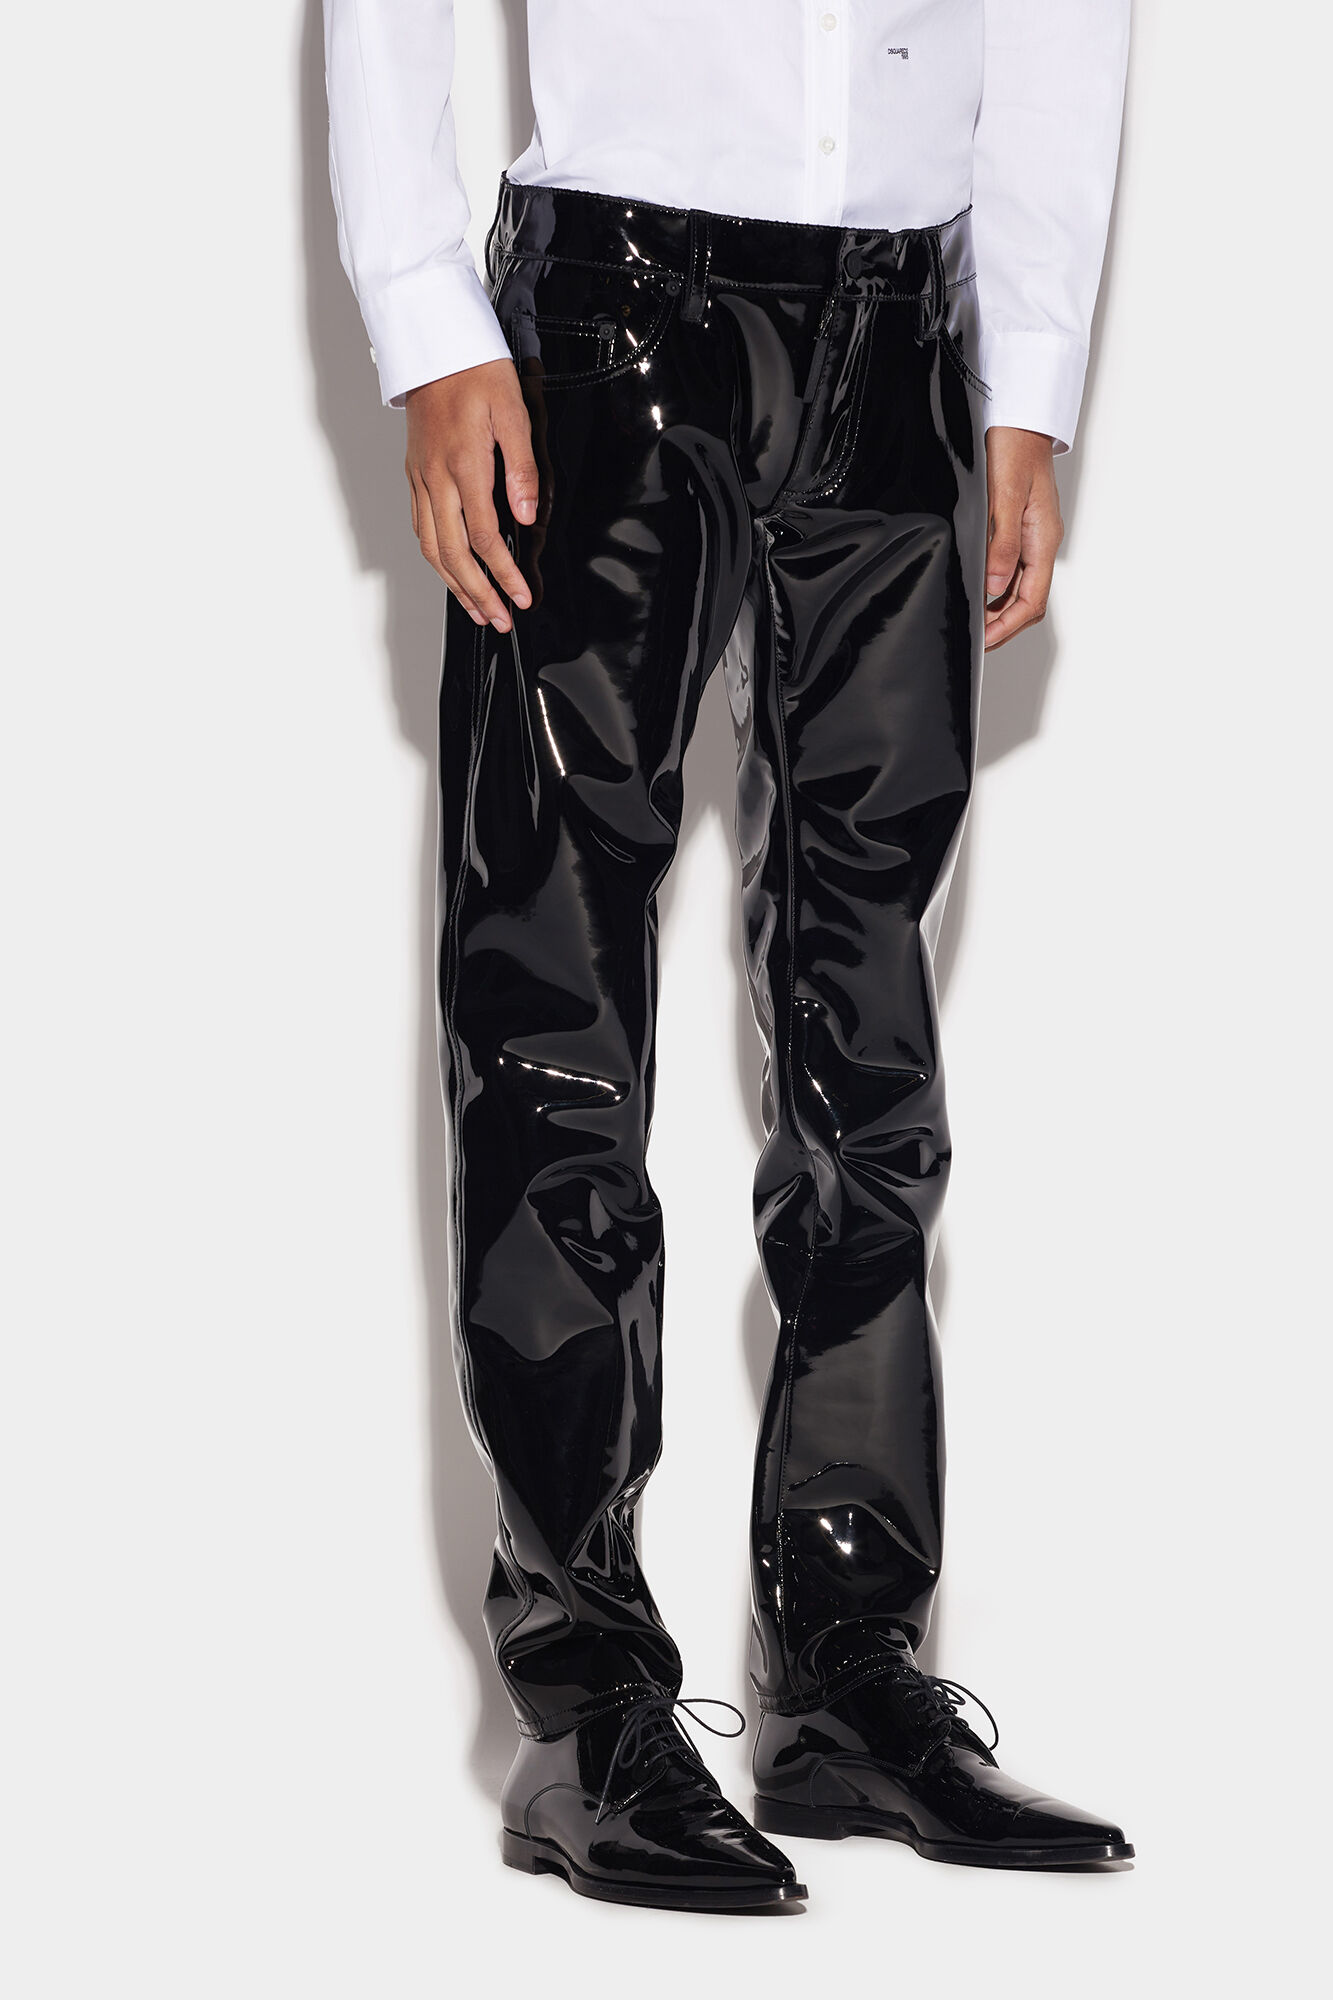 Vinyl Skinny Trousers from Pull and Bear on 21 Buttons